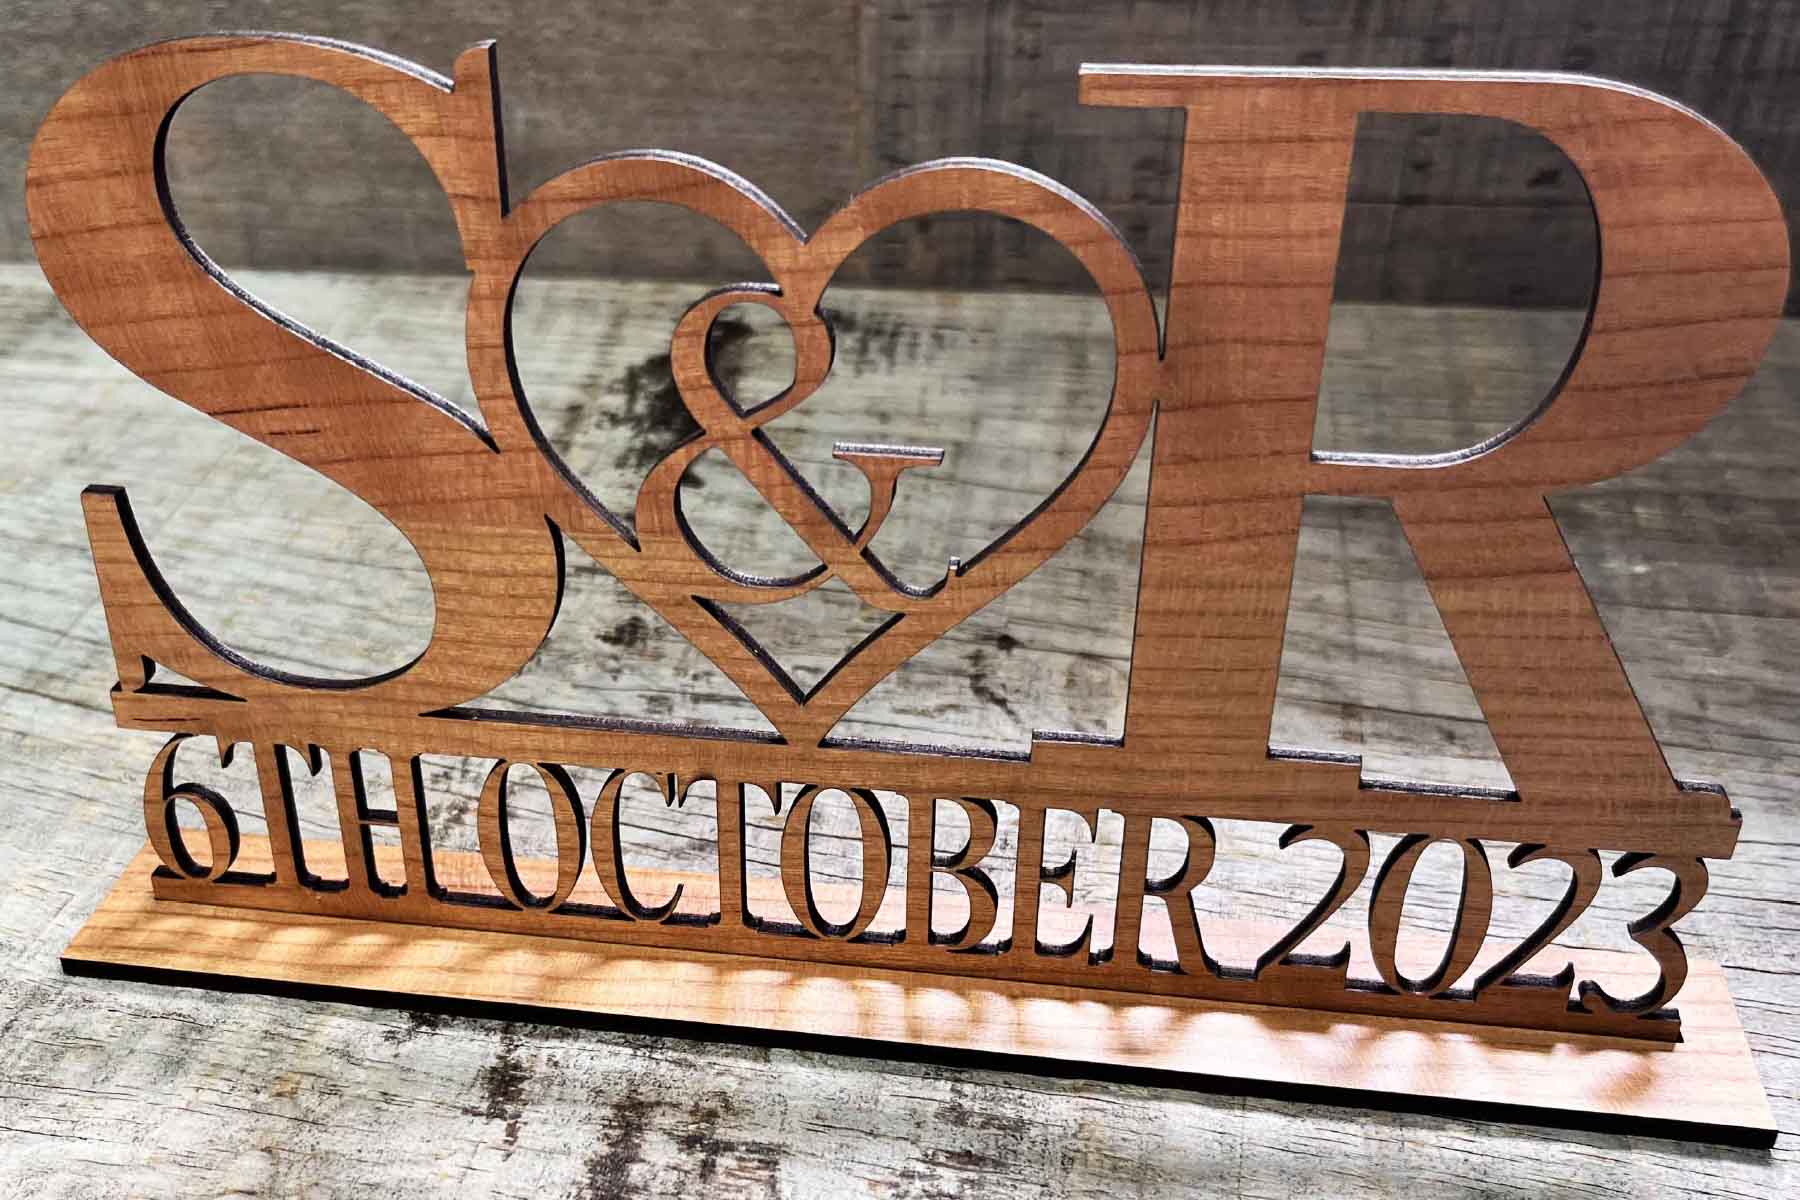 laser cut and engraved wooden signs